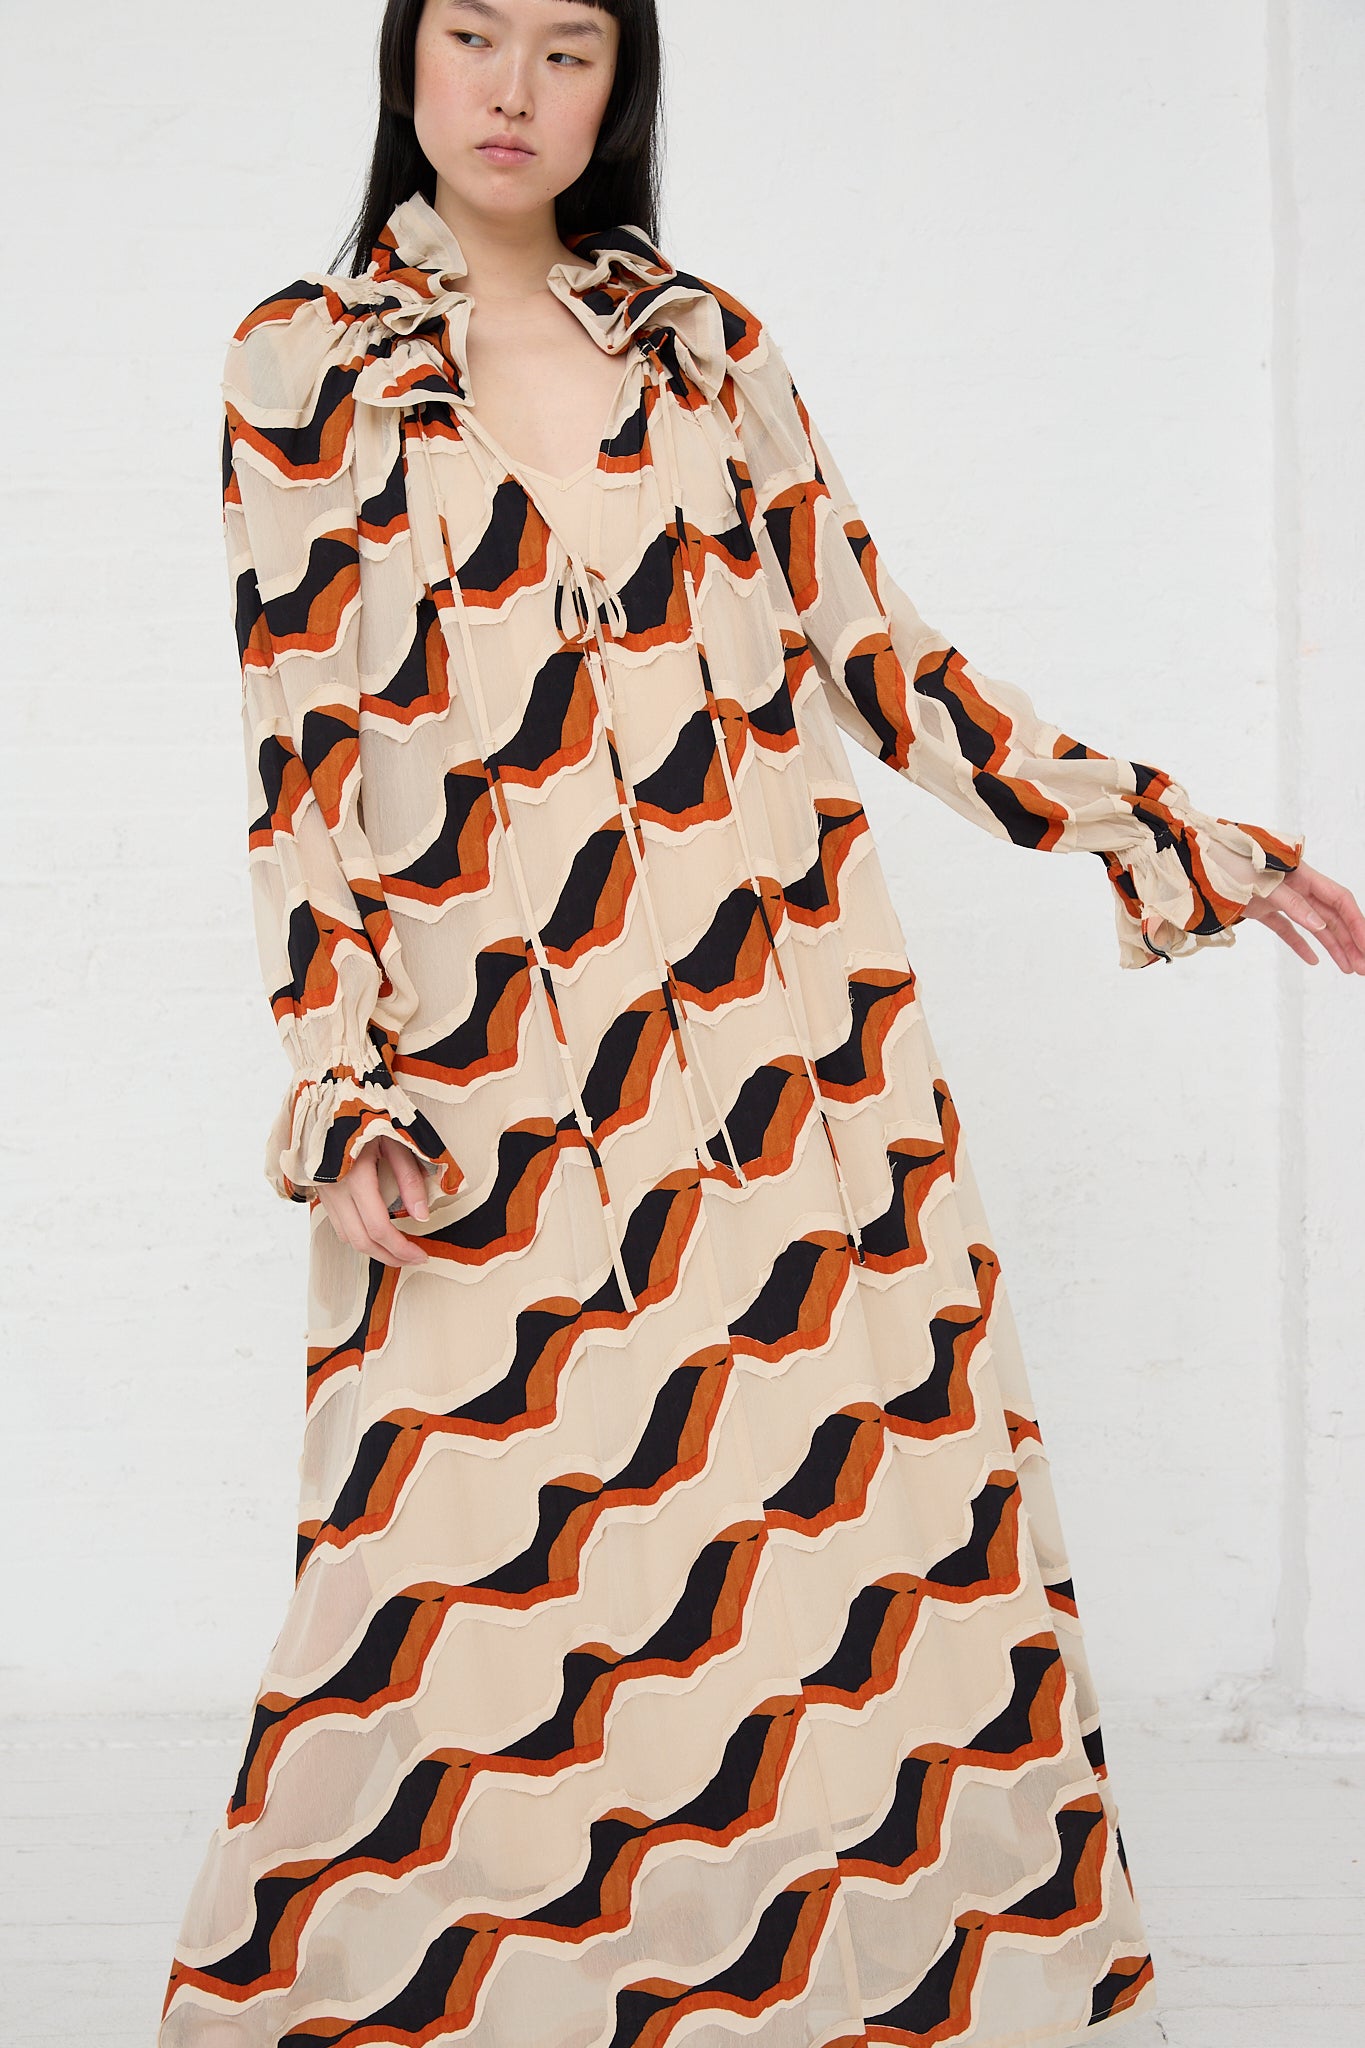 The model is wearing an Ulla Johnson Echo Dress in Conch with a black and orange pattern.